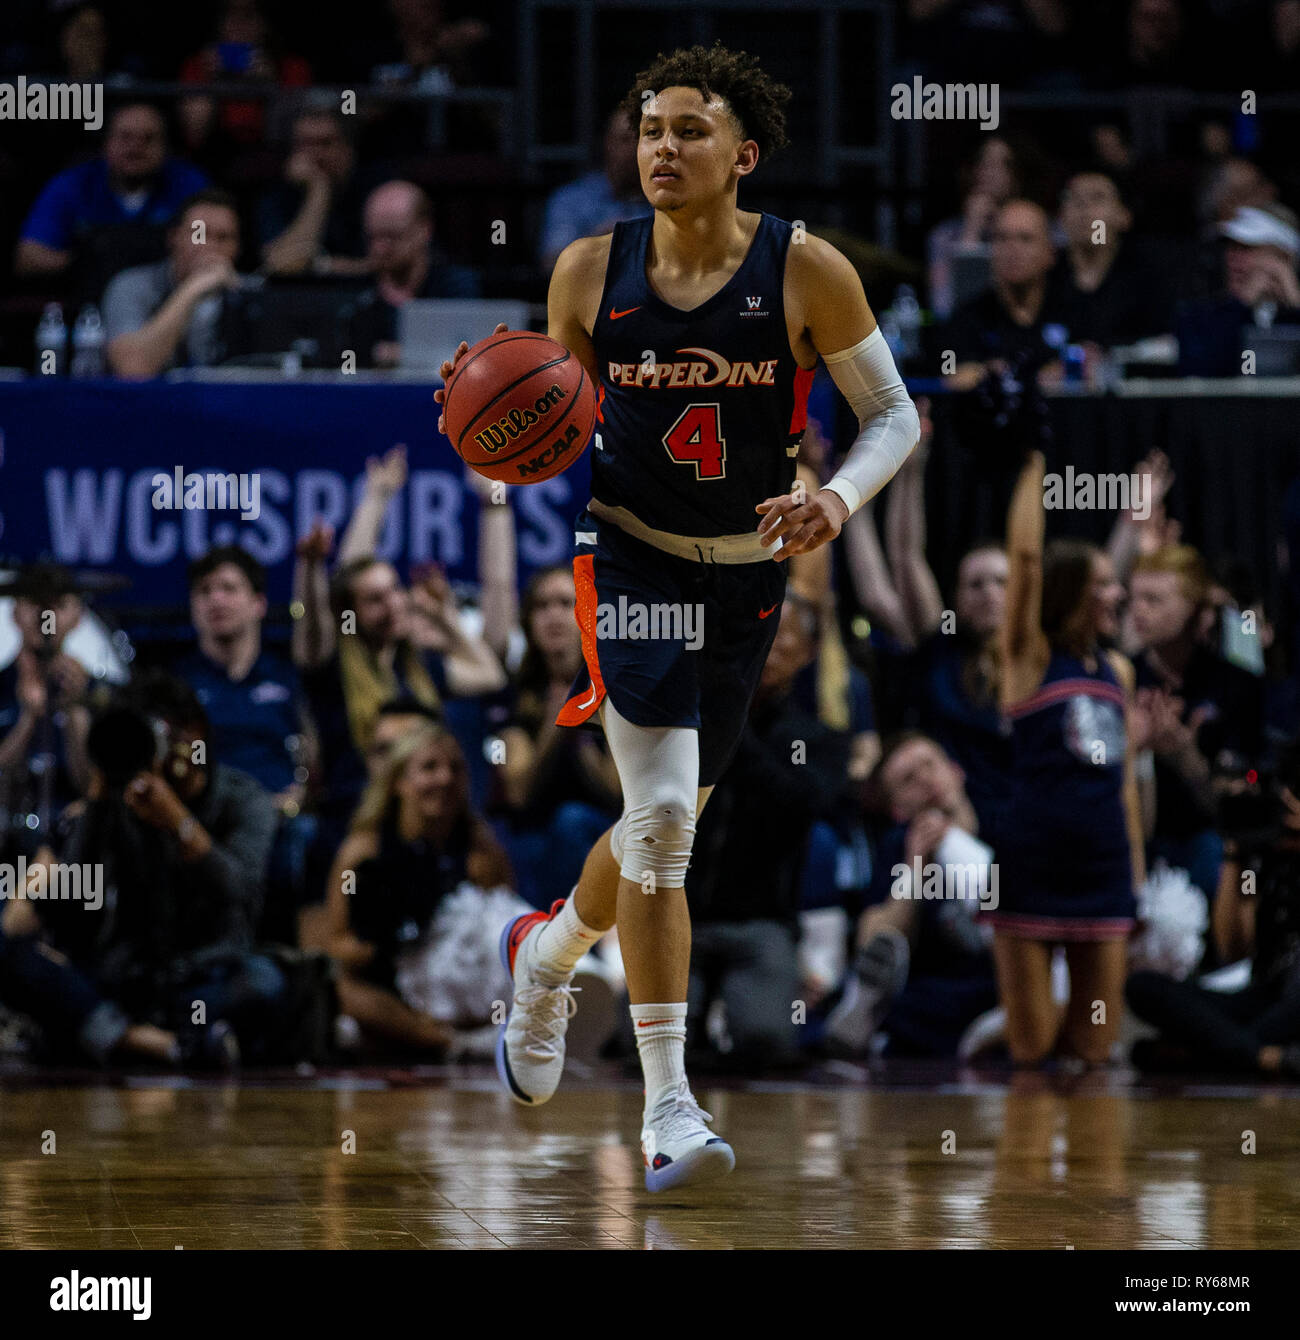 Mar 11 2019 Las Vegas, NV, U.S.A. Pepperdine guard Colbey Ross (4) set the play during the NCAA West Coast Conference Men's Basketball Tournament semi -final between the Pepperdine Wave and the Gonzaga Bulldogs 74-100 lost at Orleans Arena Las Vegas, NV. Thurman James/CSM Stock Photo